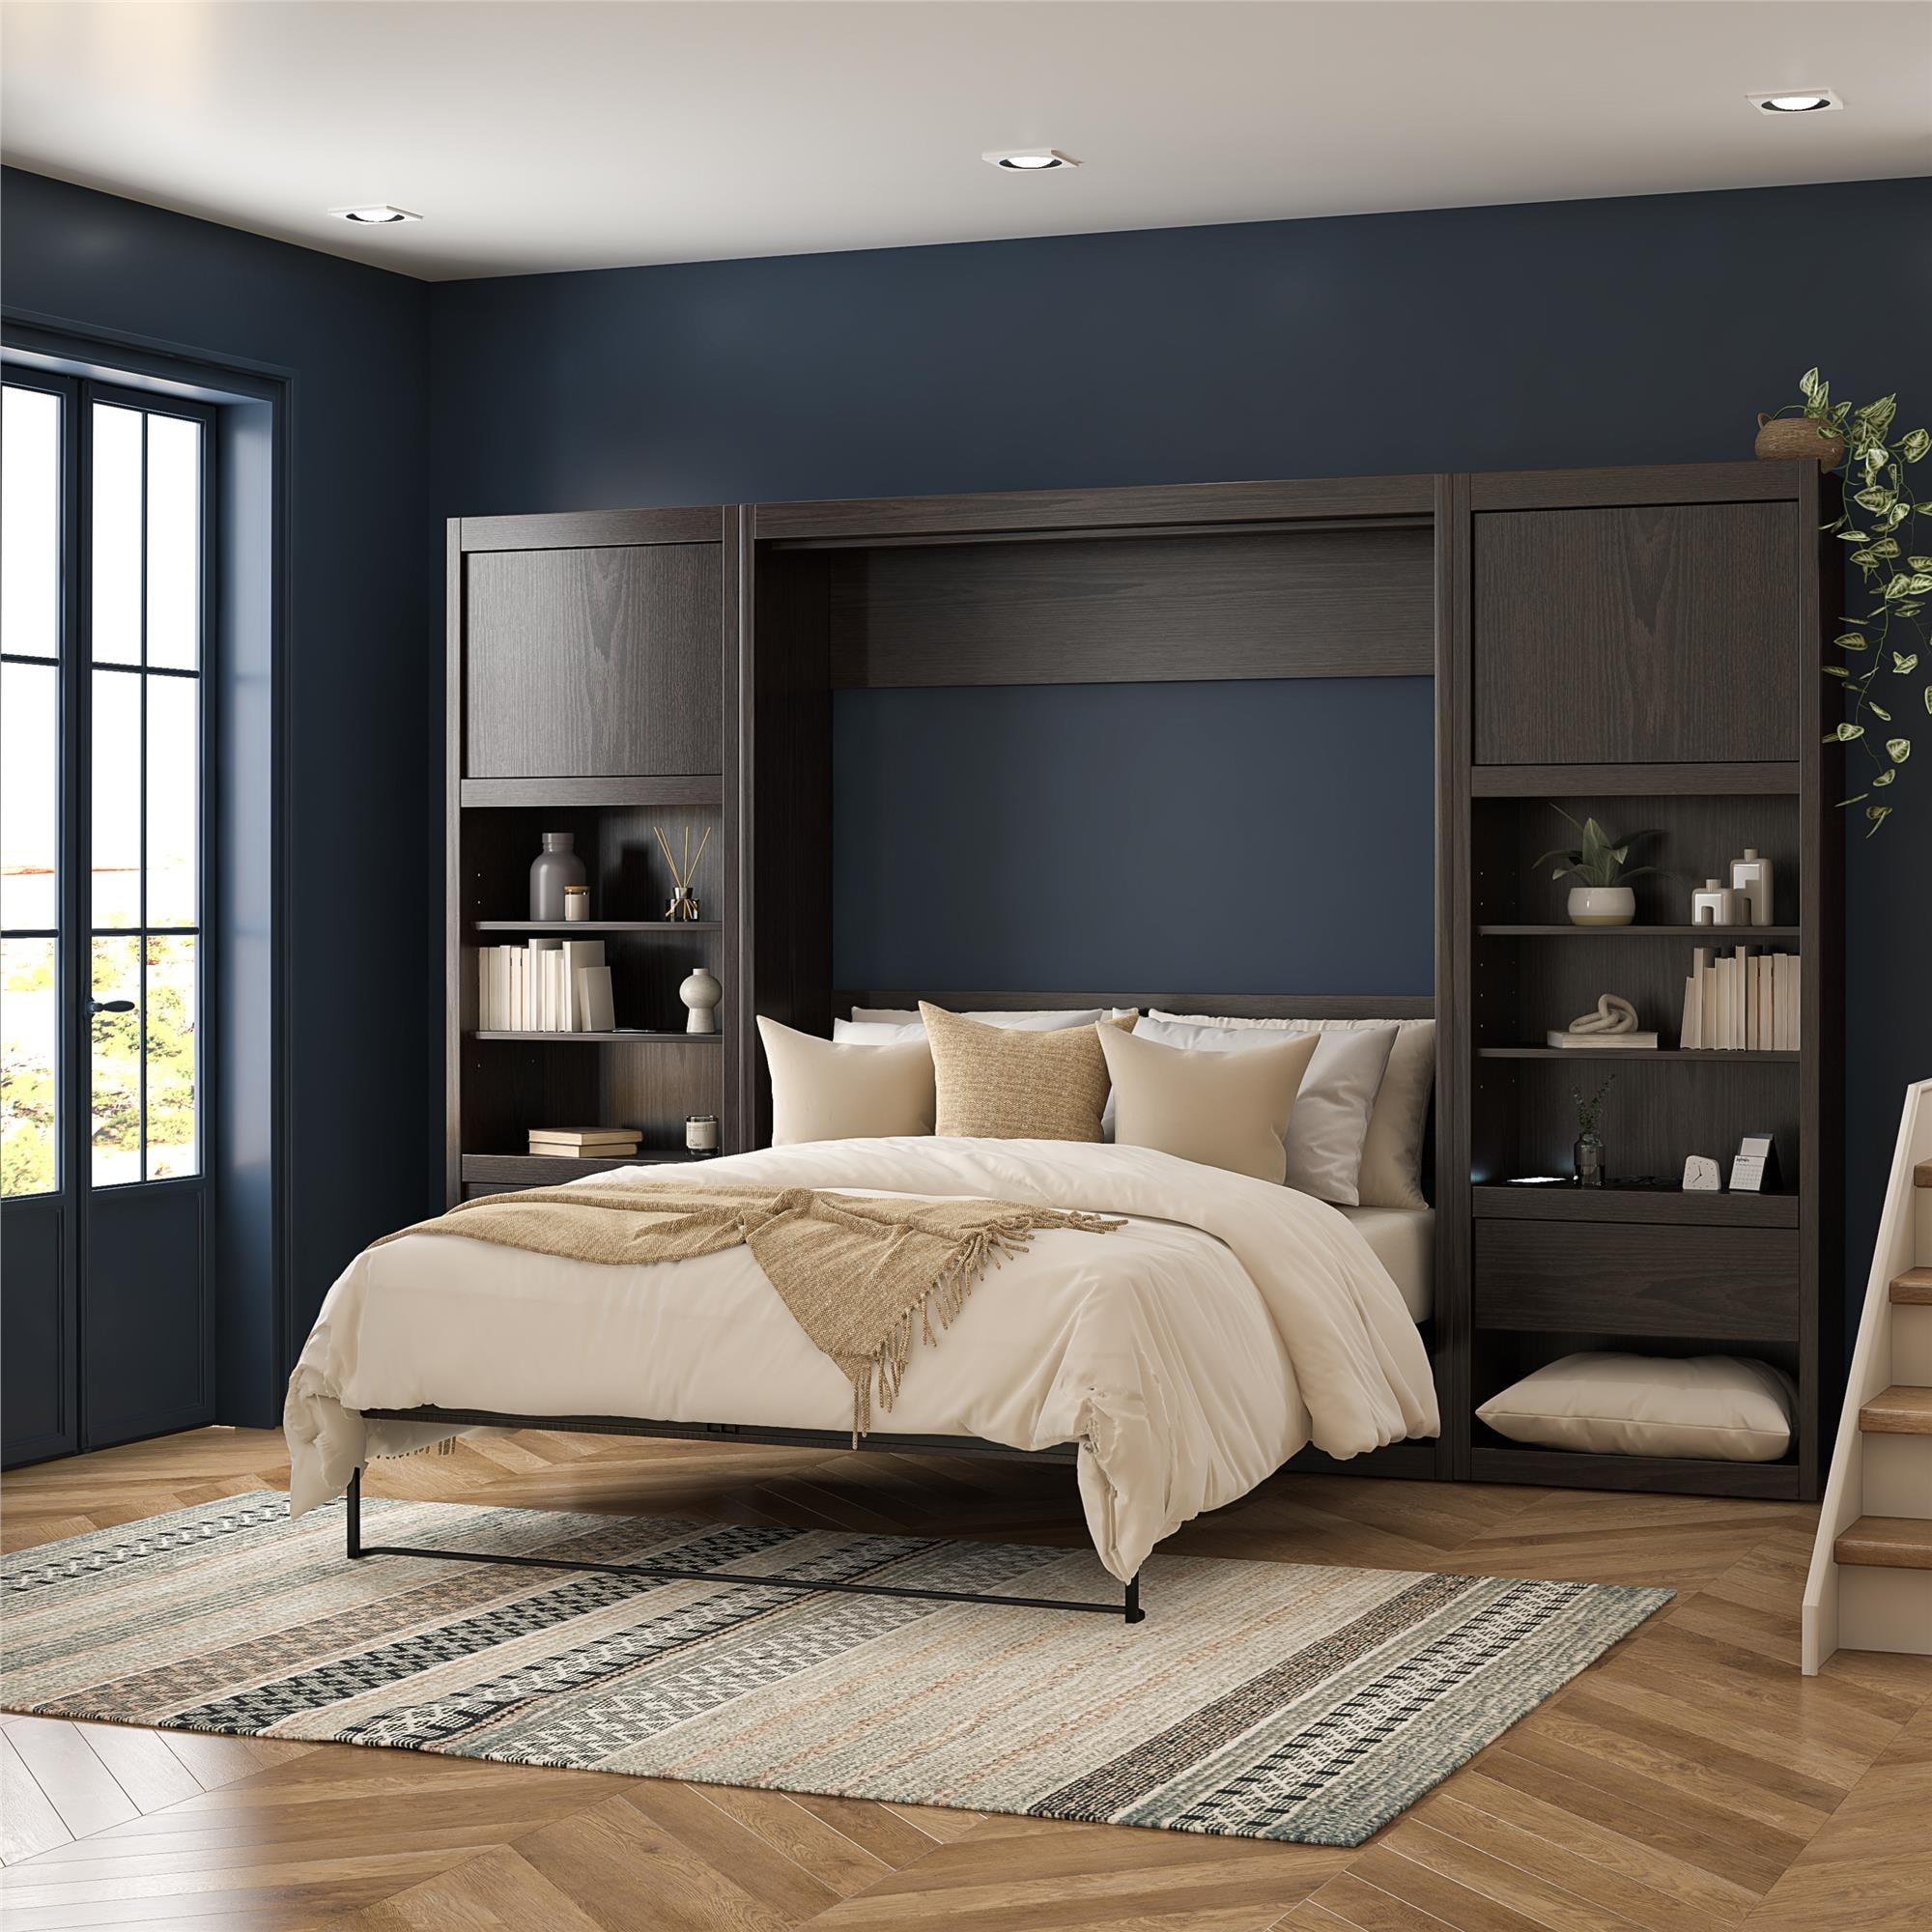 https://ak1.ostkcdn.com/images/products/is/images/direct/c59037a5f4665ba6c807bb5fbe5b4ee95e300fb2/Signature-Sleep-Full-Wall-Bed-Cabinet-Bundle.jpg